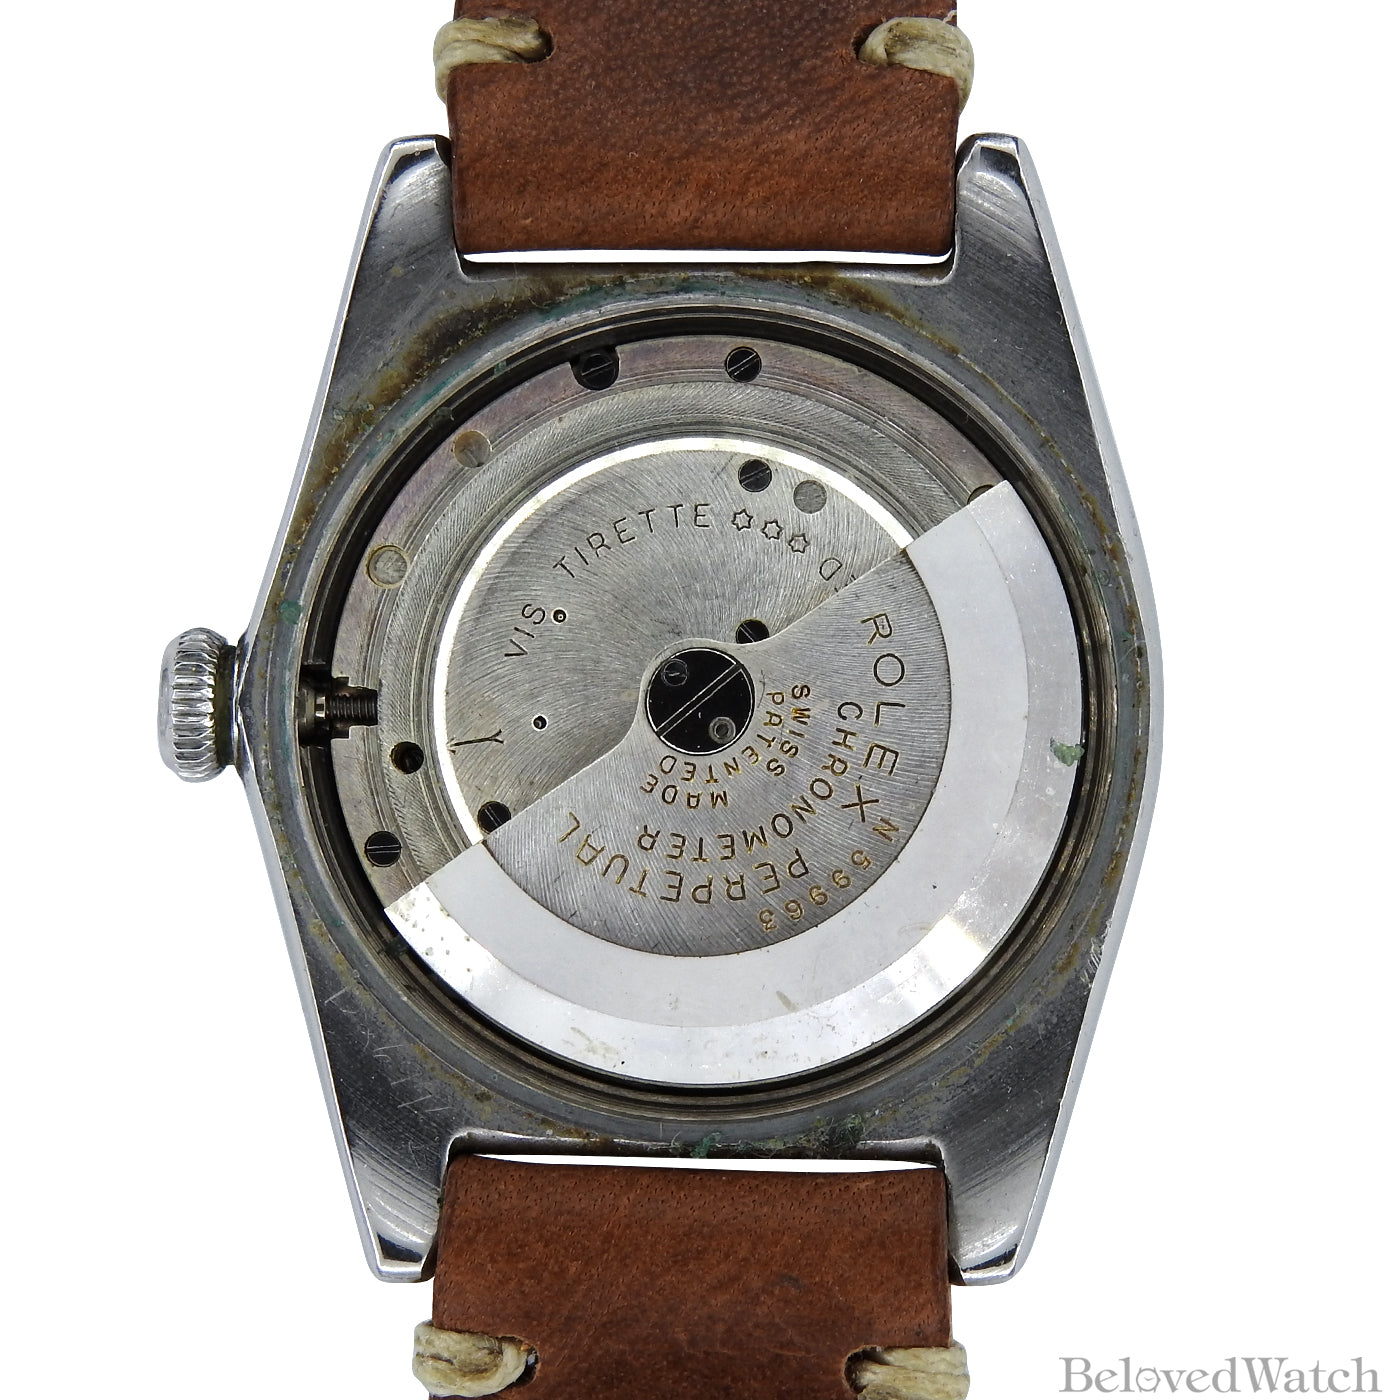 Rolex Oyster Perpetual 2940